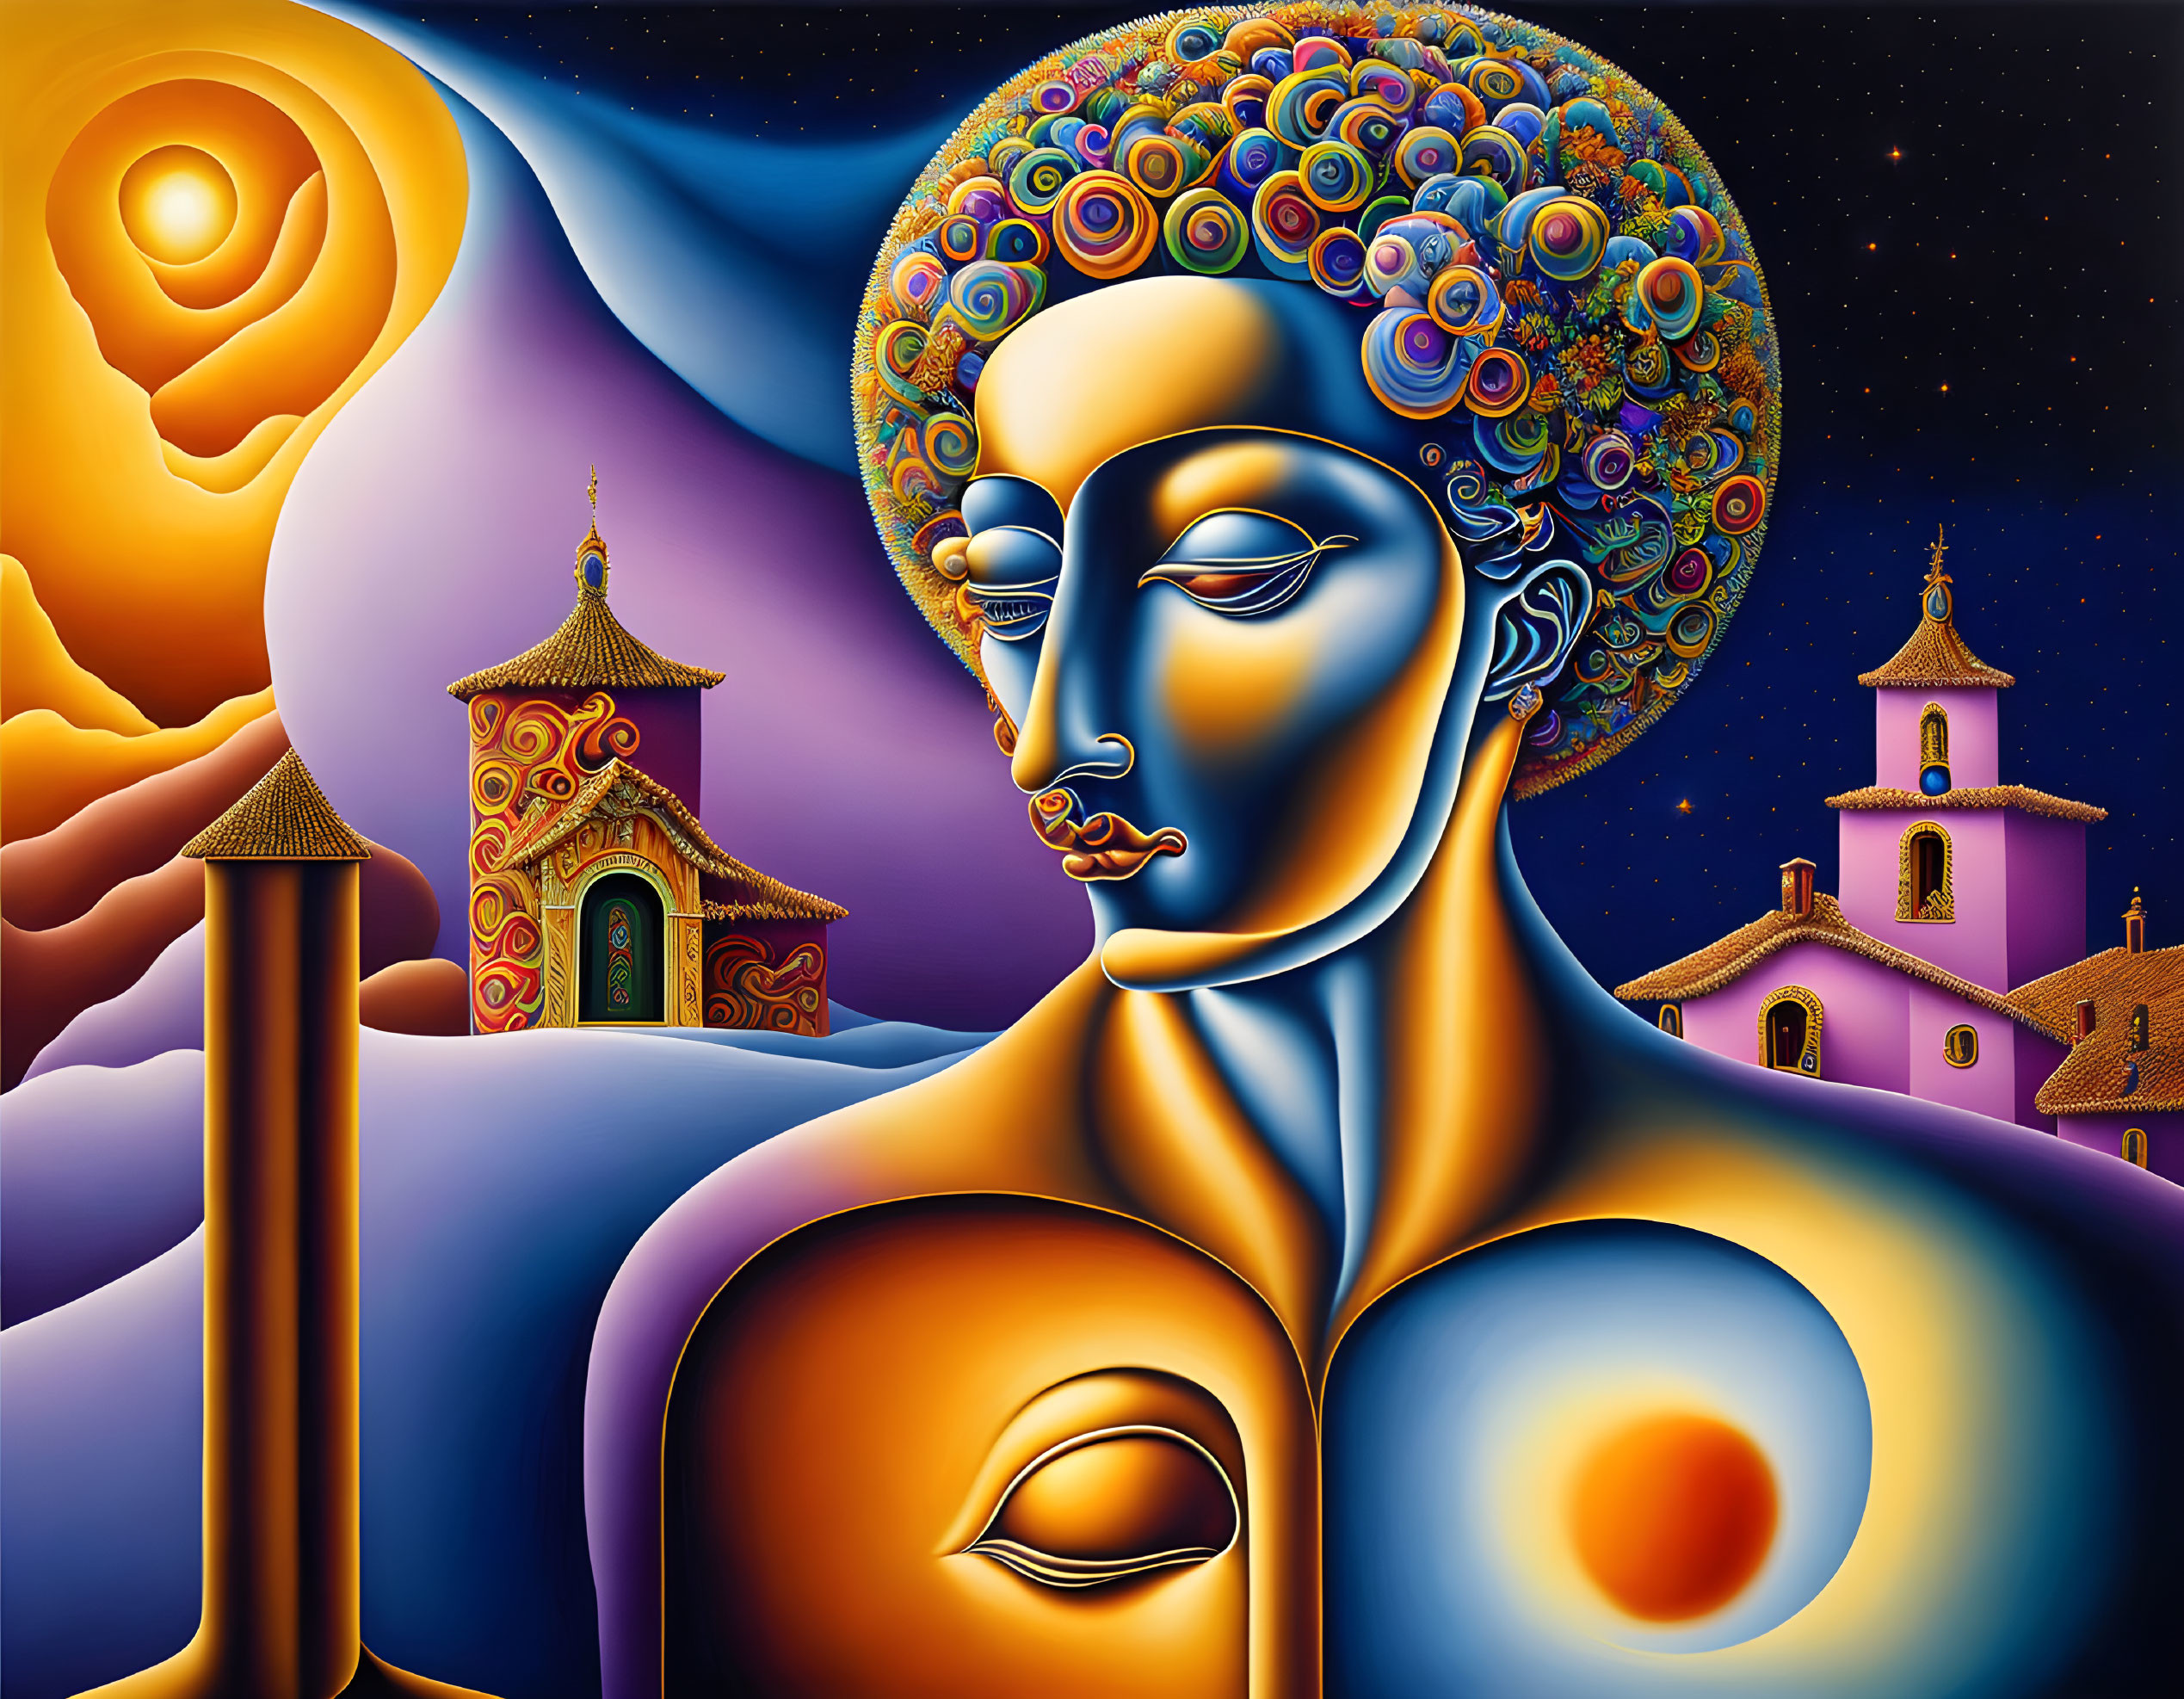 Colorful surreal painting of a stylized figure in ornate patterns against abstract landscape